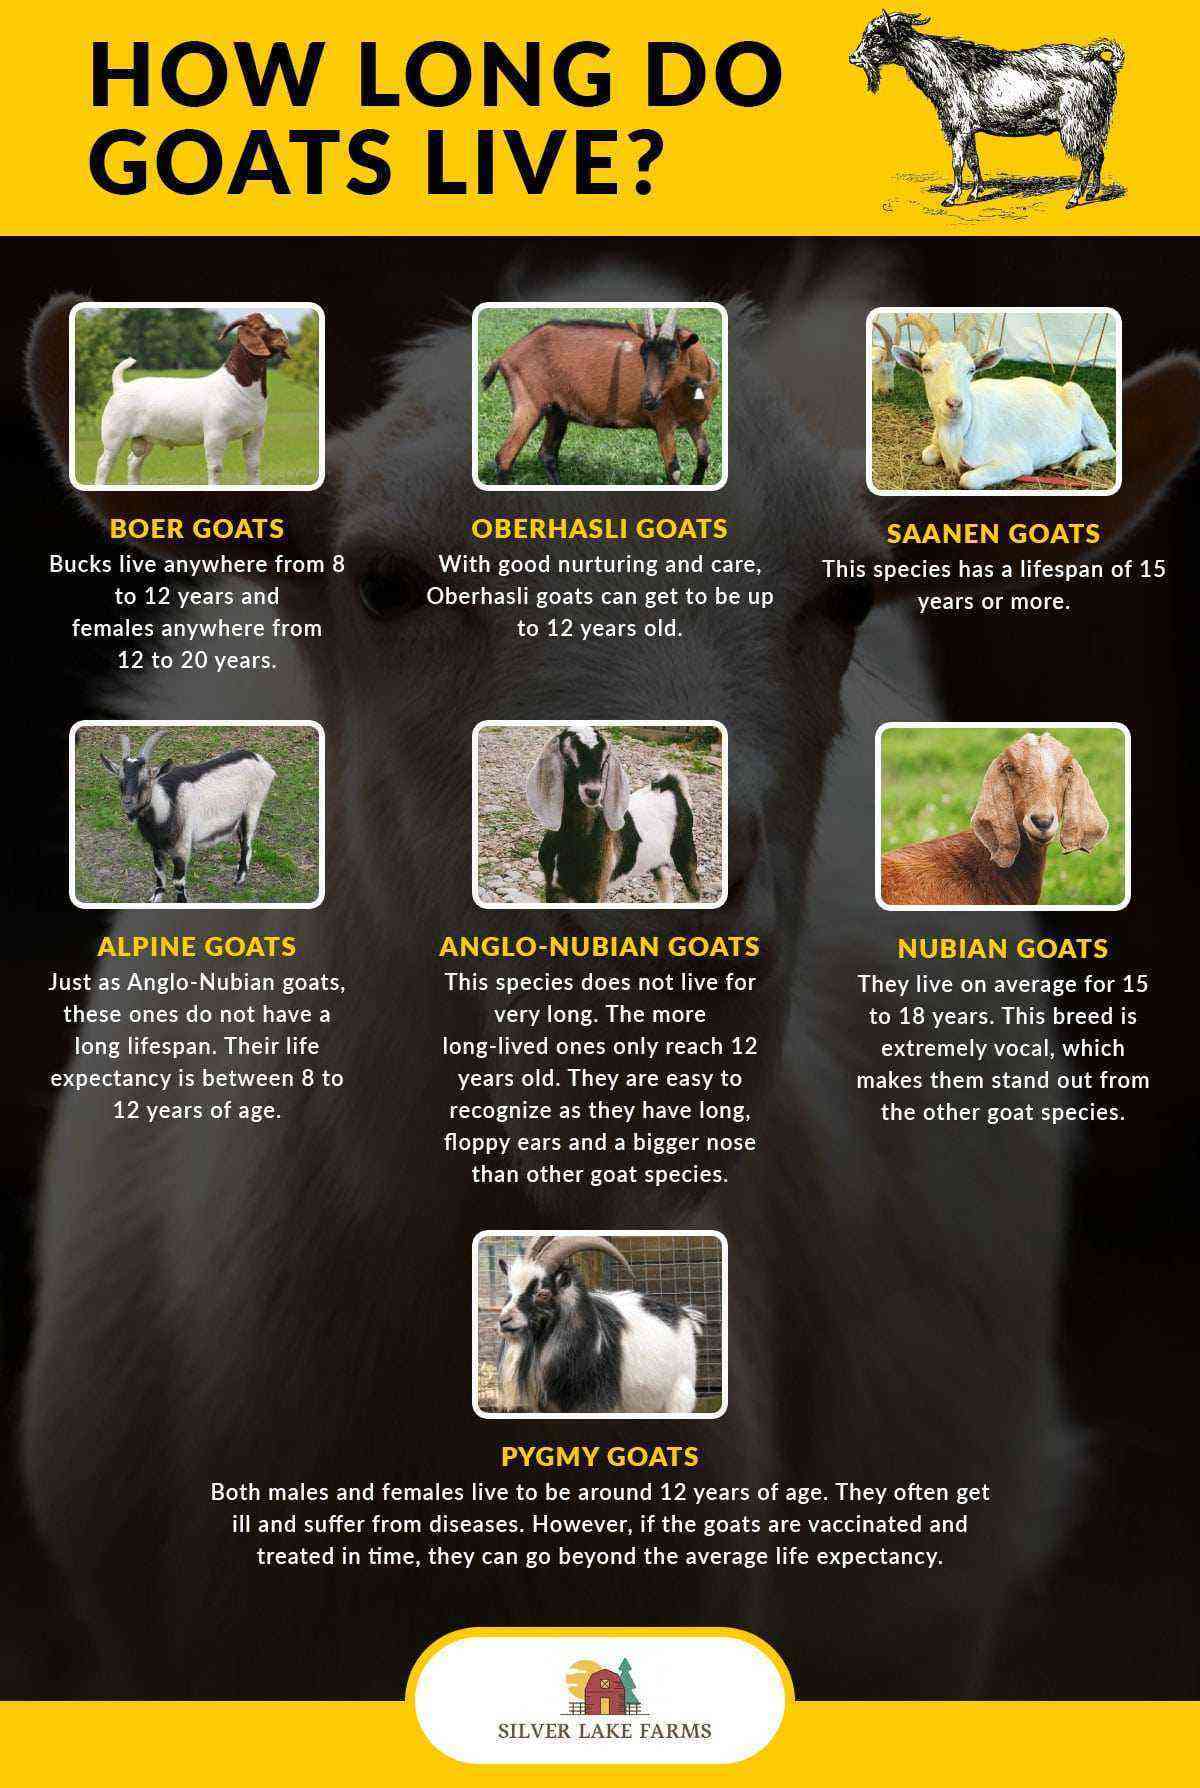 What affects the life expectancy of a goat?